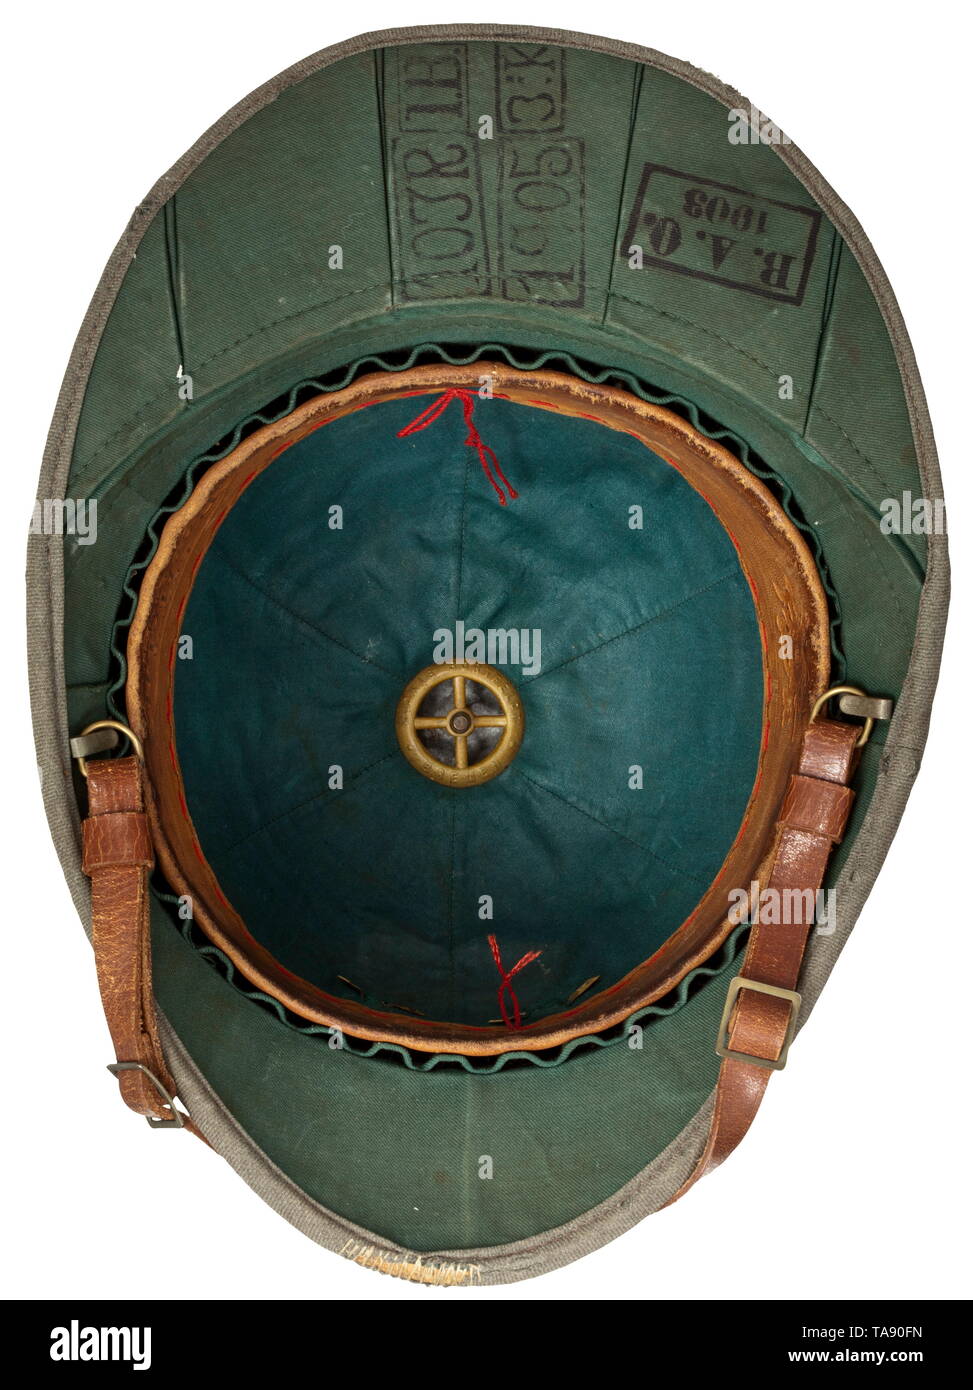 A tropical helmet M 1900 of the East Asiatic Expeditionary Corps Depot piece. Cork body with field-grey textile covering and edging (blemishes), unscrewable ventilation cap and folding neck guard. Green liner, brown leather sweatband with size stamping '54 1/2', embossed maker's crest and lettering 'Ludwig Bortfeldt Bremen', brown chinstrap with brass slides. The neck guard underside stamped 'B.A.O. 1903' and quadruple stamped '10 IR - I.B. - 3.K. - 1905'. Pinned on golden imperial eagle, trim band in white arm of service colour with pinned lacqu, Additional-Rights-Clearance-Info-Not-Available Stock Photo